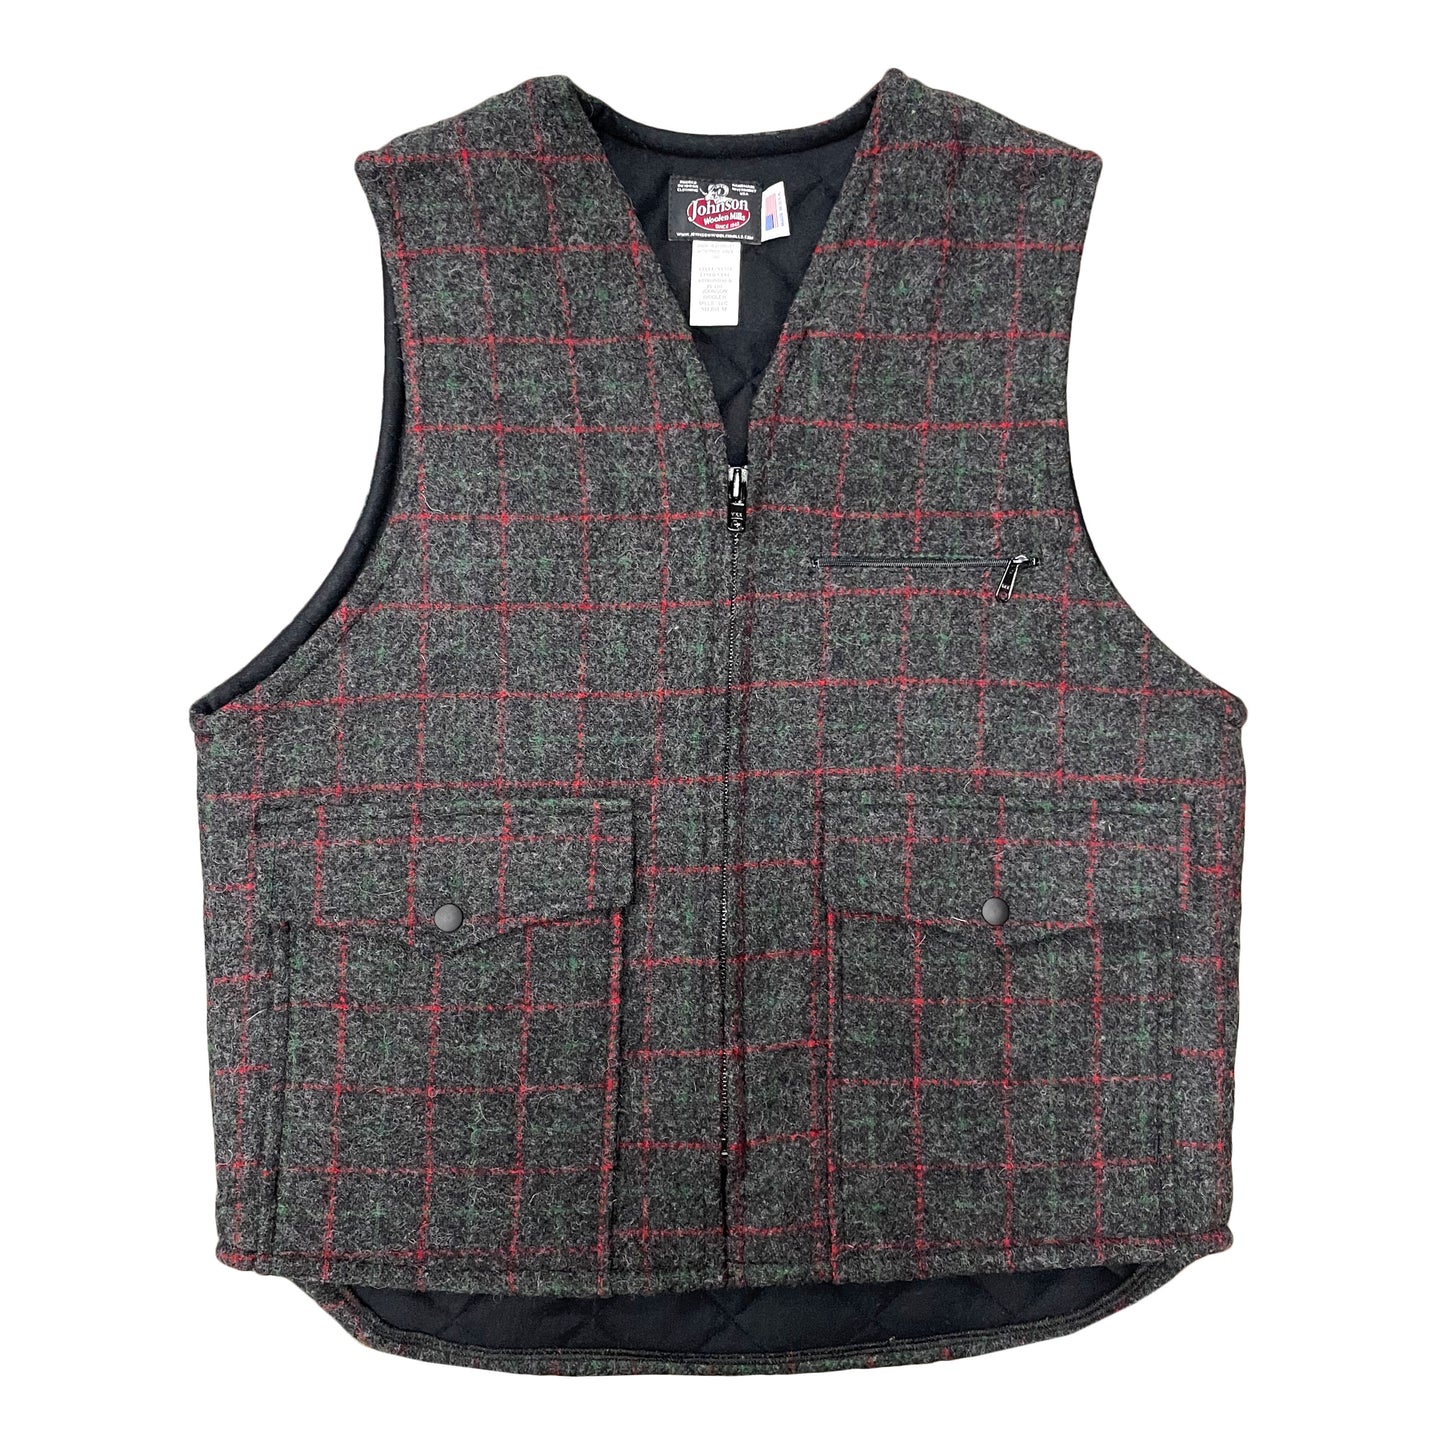 Vest with tricot lining, Adirondack, grey with red & green pin stripes, zipper front, two large pockets and chest pocket